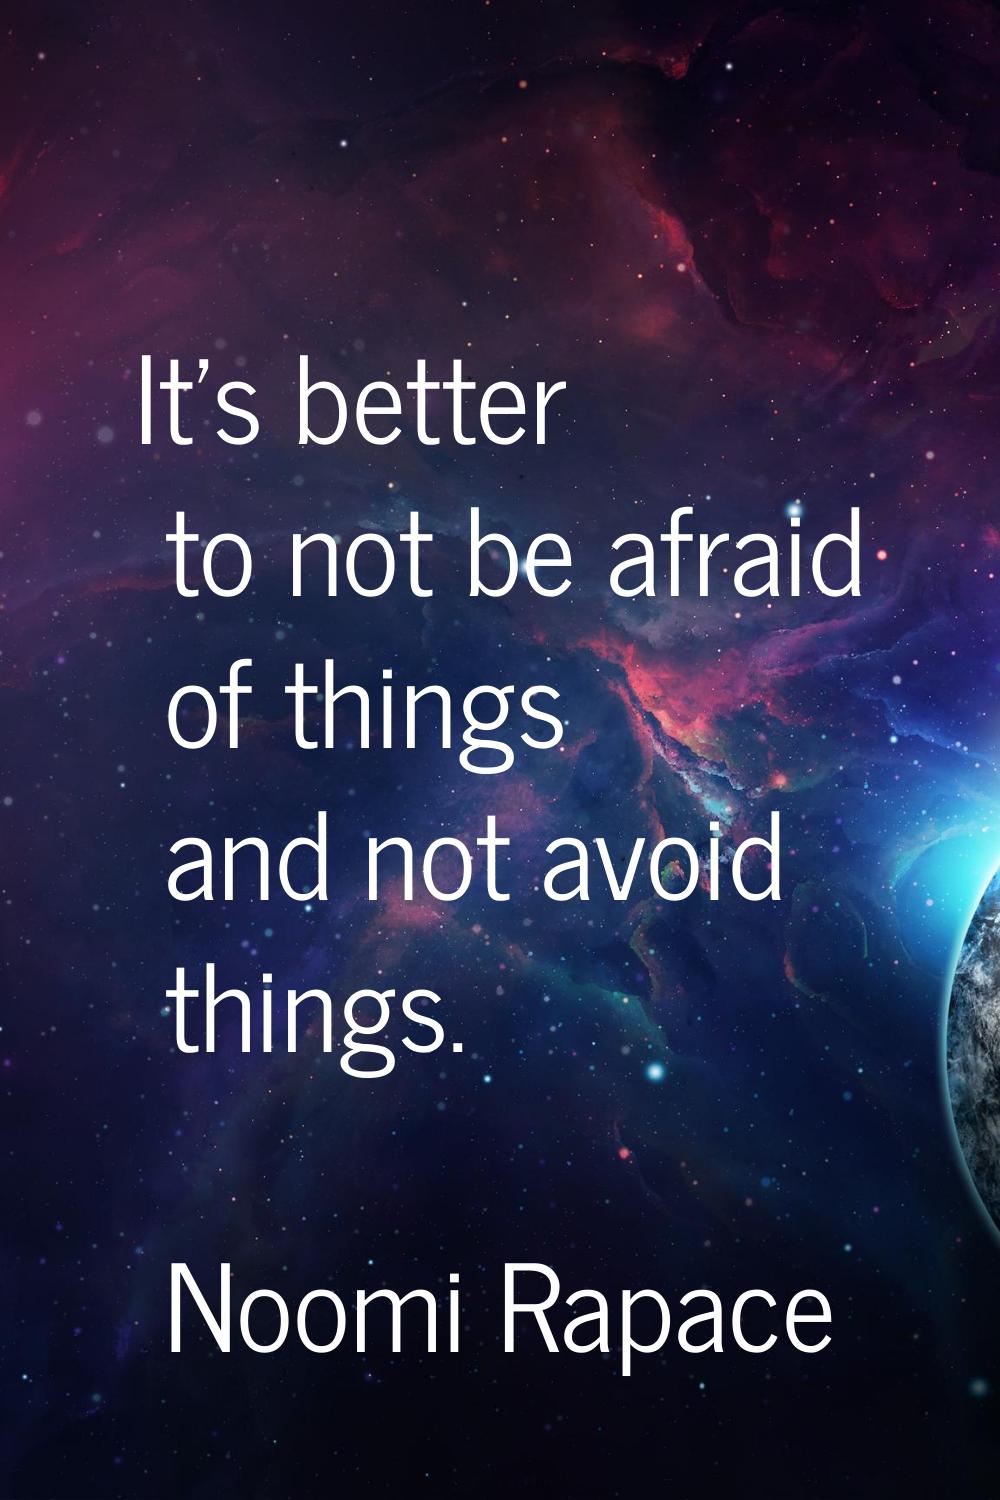 It's better to not be afraid of things and not avoid things.